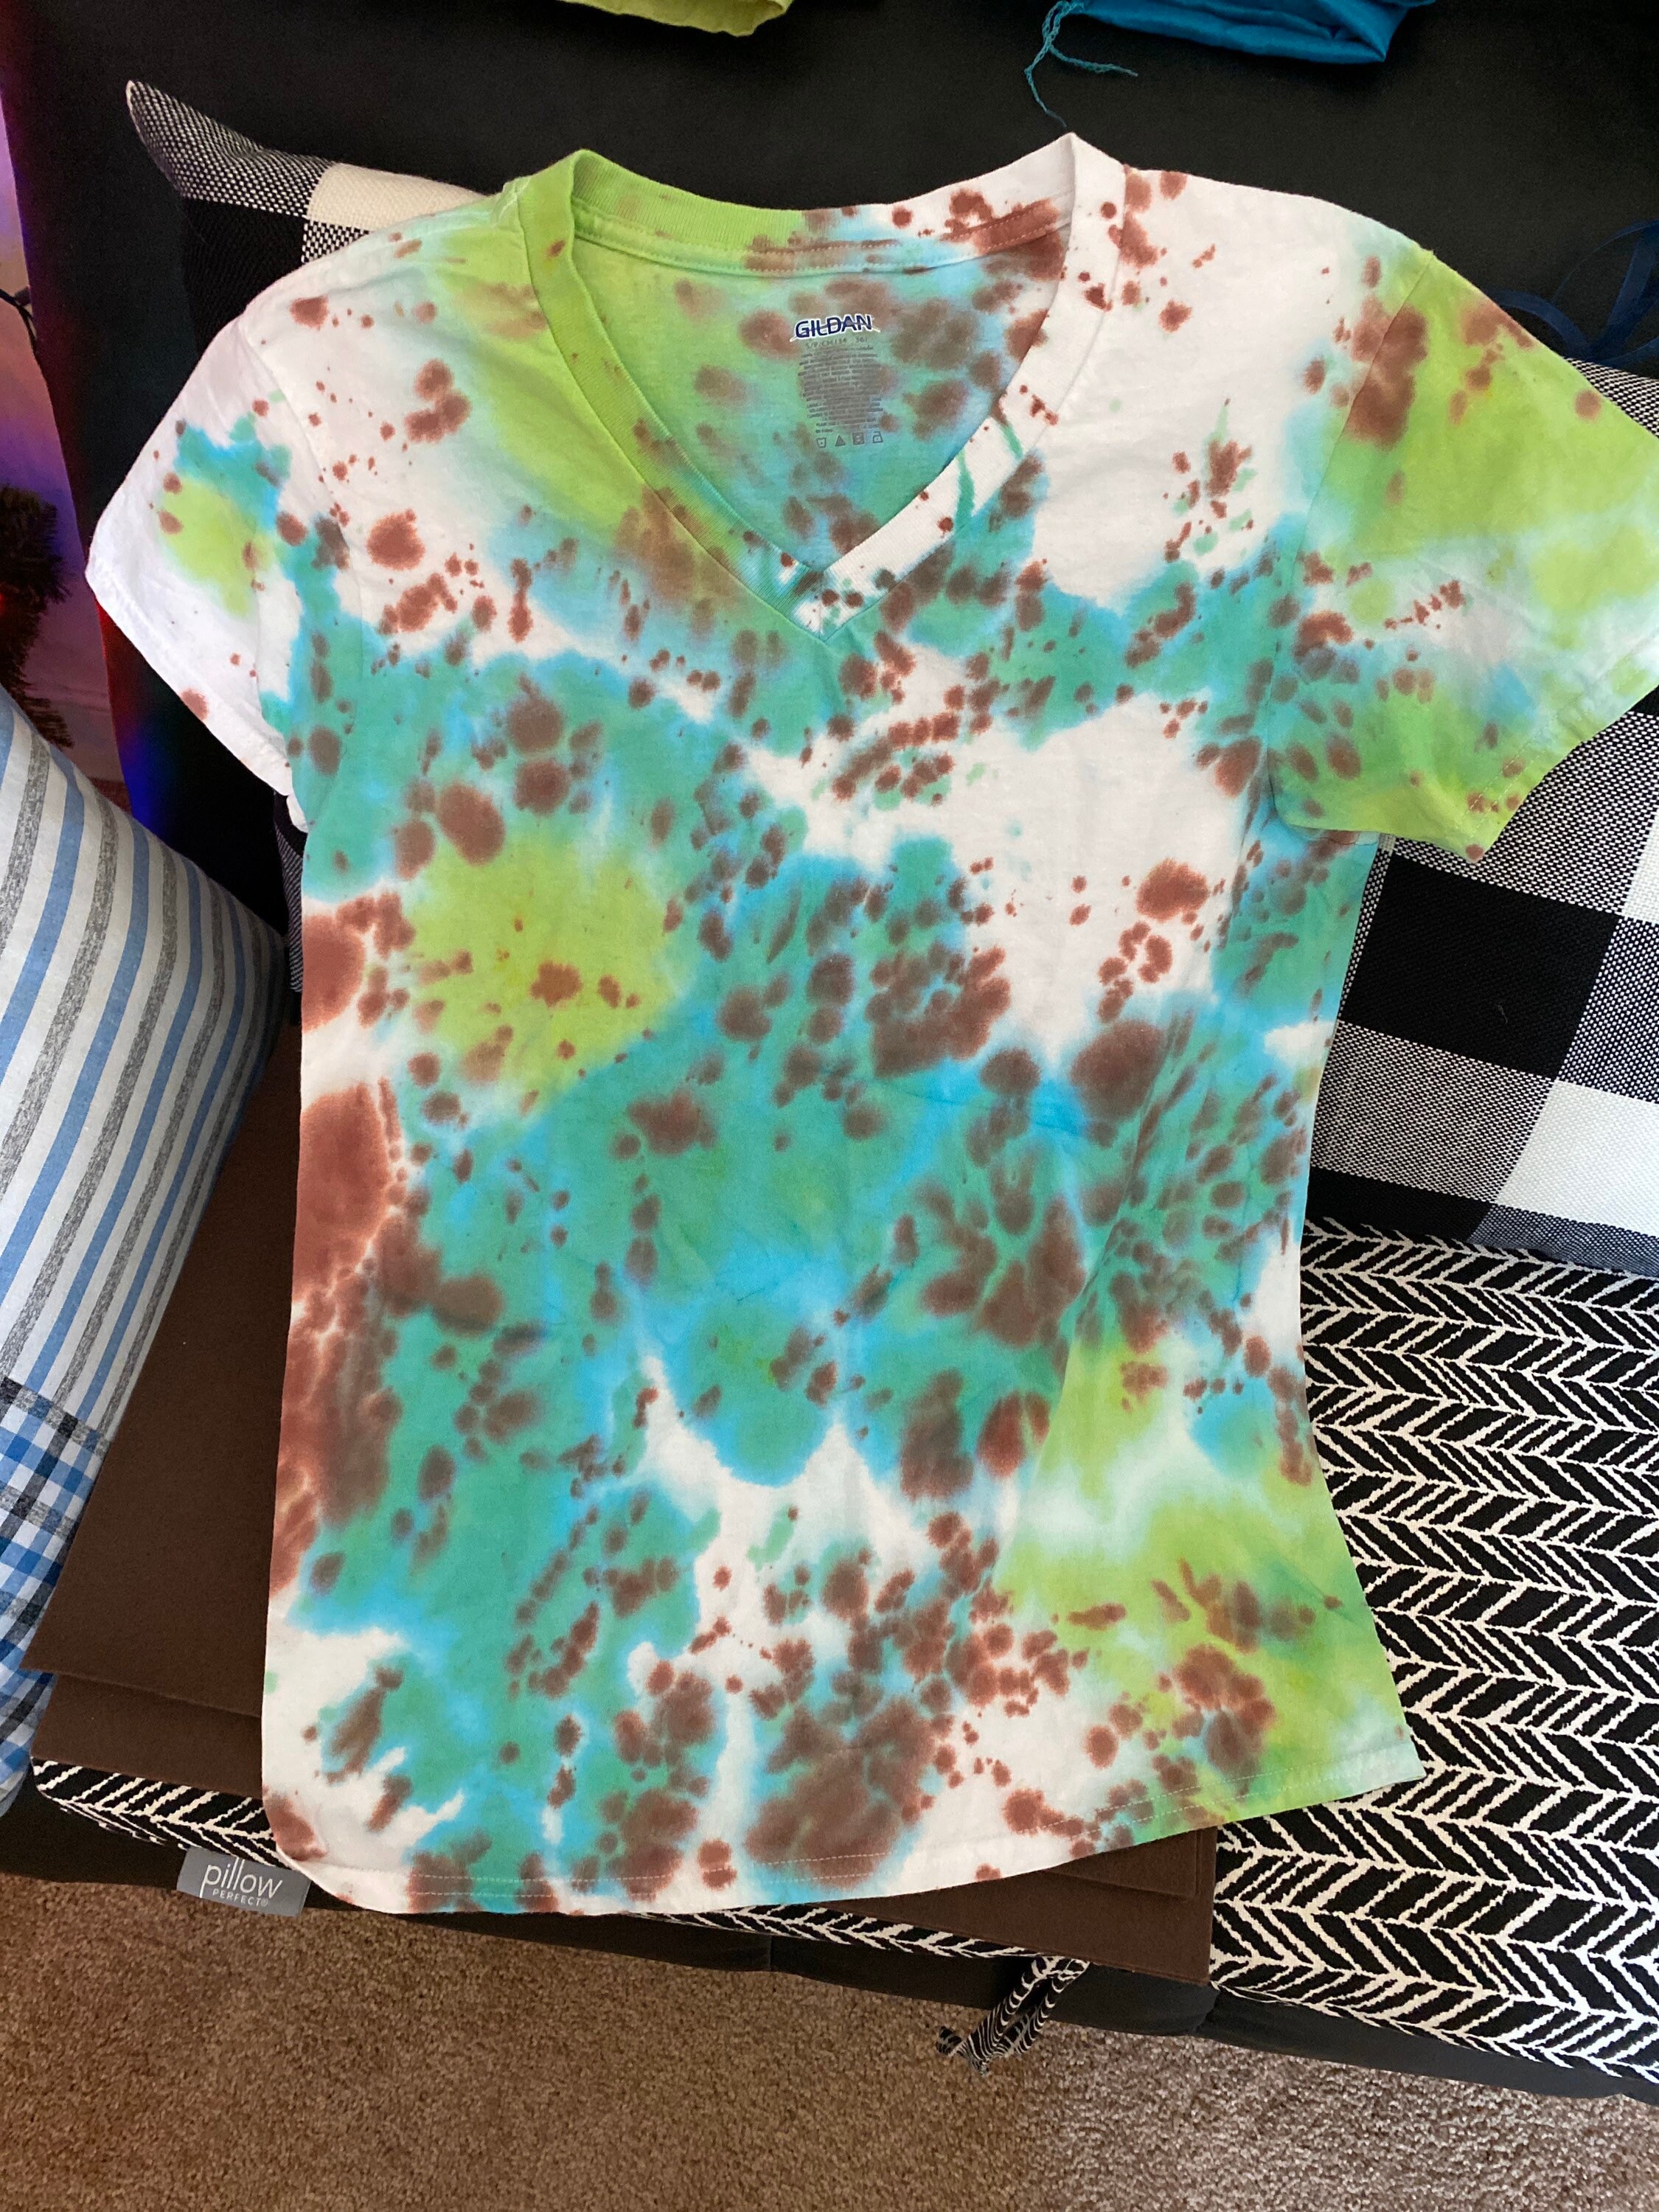 Tie dye t shirt small shades of green brown with dots | Etsy